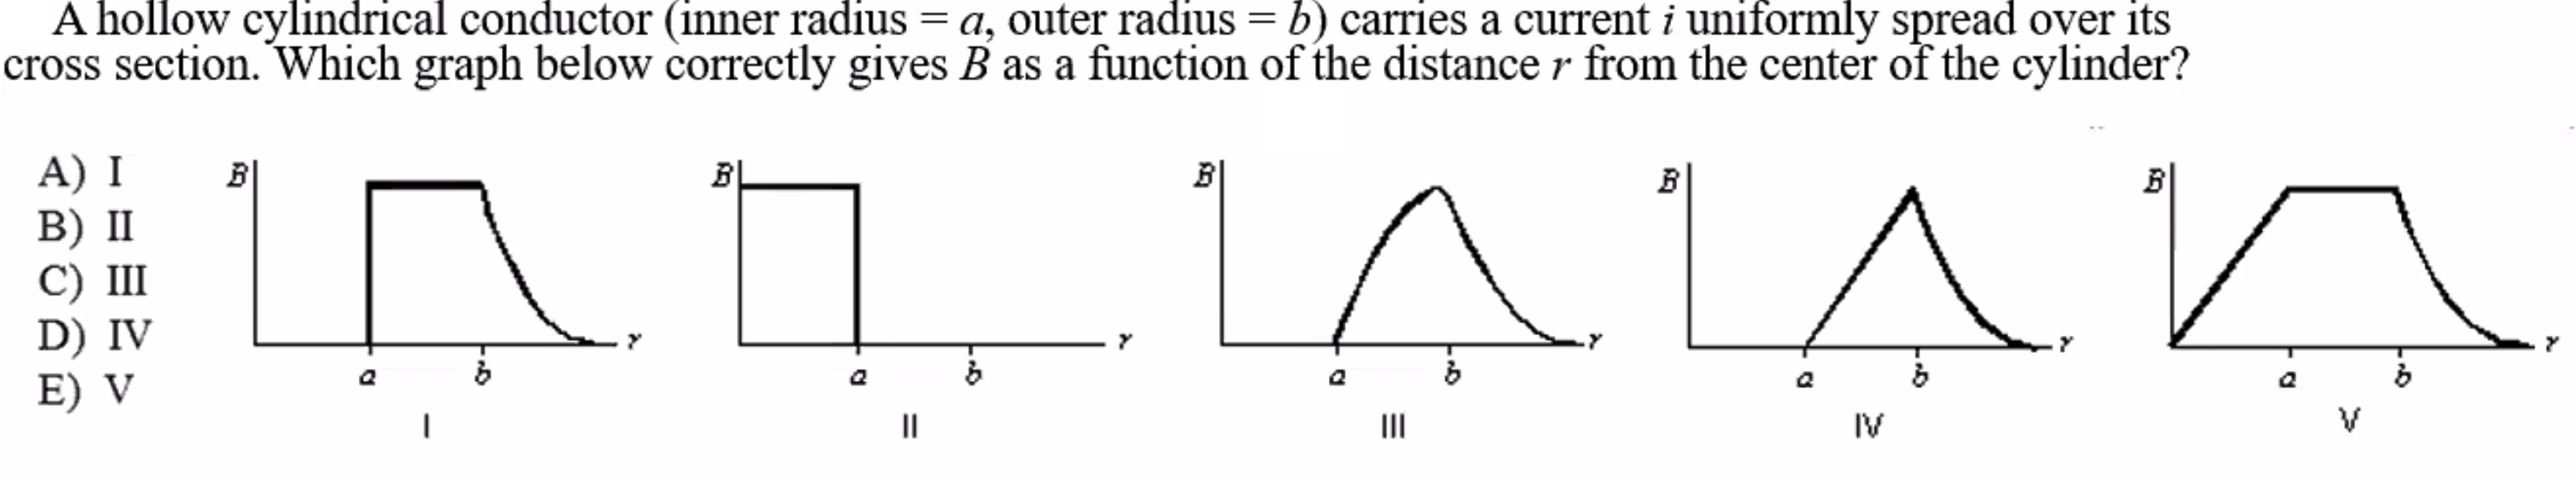 A hollow cylindrical conductor (inner radius = a, outer radius = b) carries a current i uniformly spread over its
cross section. Which graph below correctly gives B as a function of the distance r from the center of the cylinder?
A) I
В) П
С) Ш
D) IV
E) V
II
II
IV
